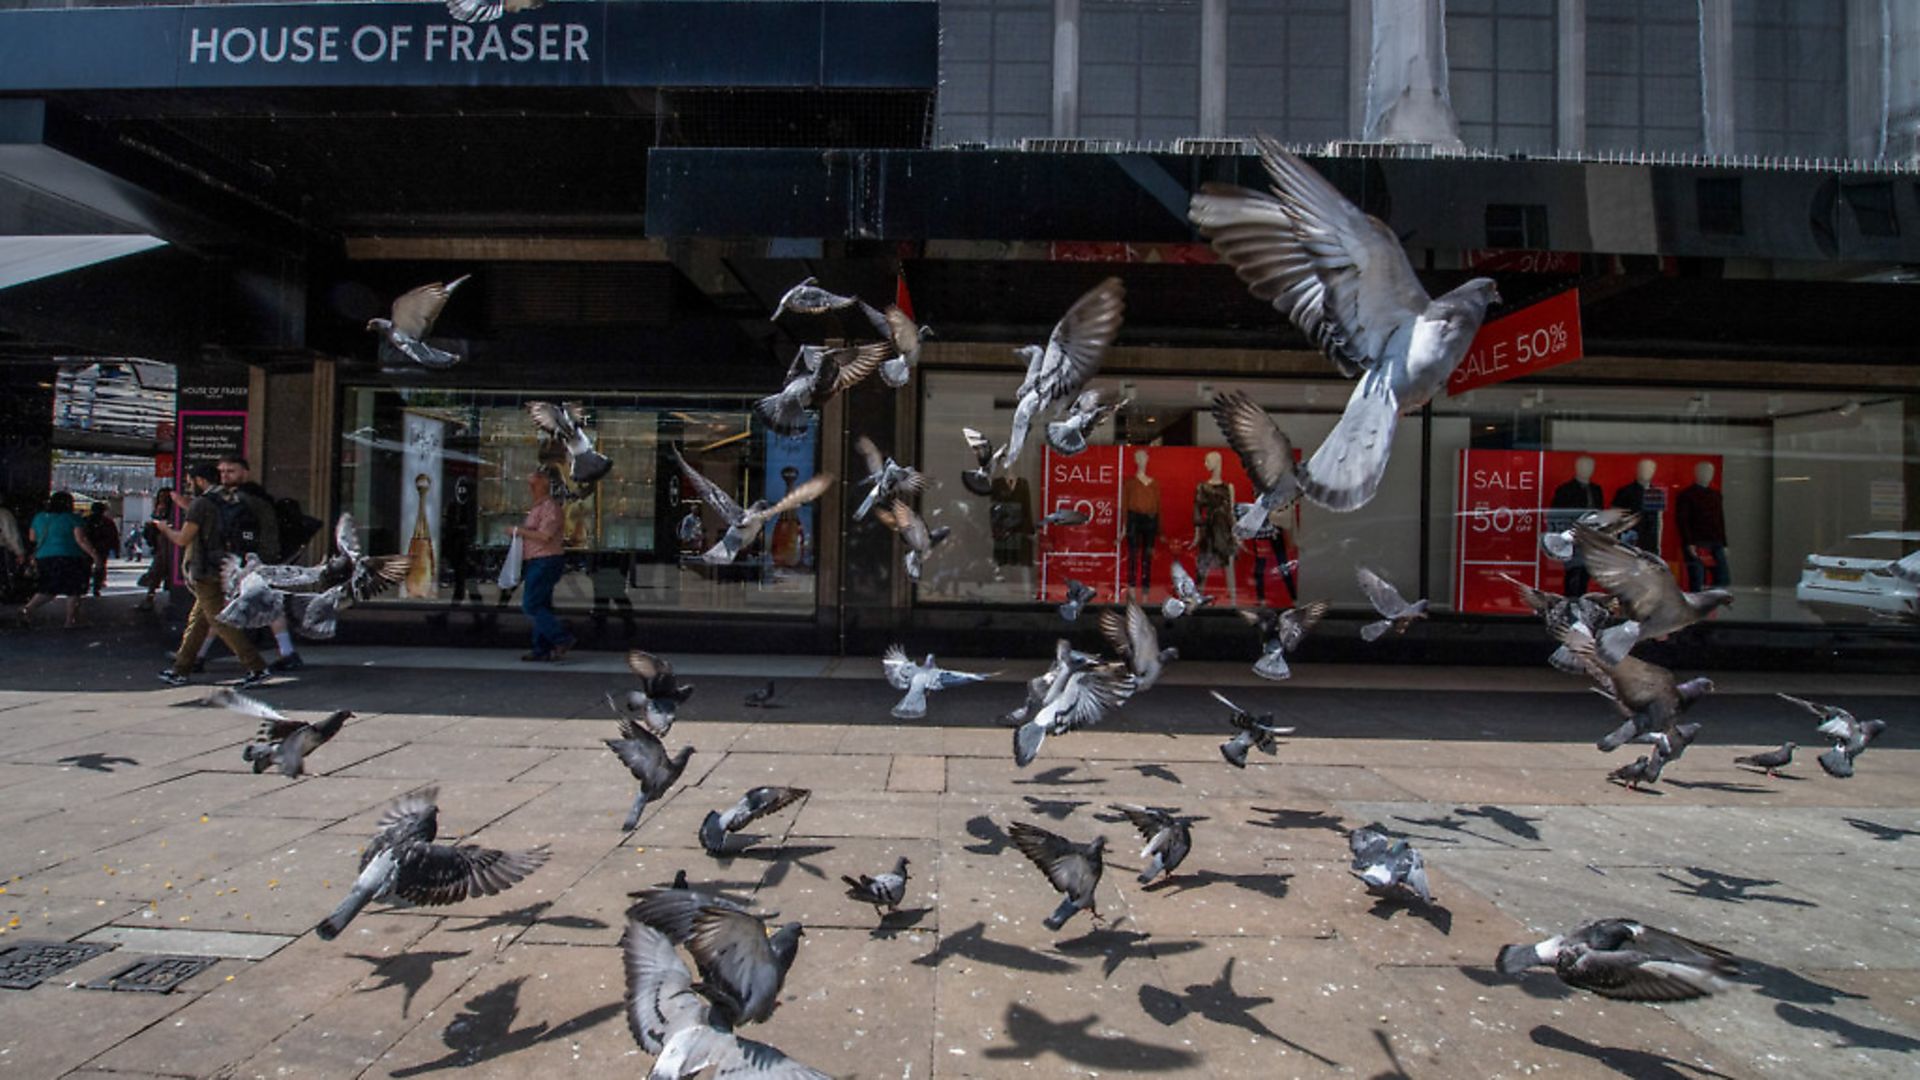 Pigeons fly in front of a House of Fraser store. Photographer: Chris J. Ratcliffe/Bloomberg via Getty Images - Credit: Bloomberg via Getty Images